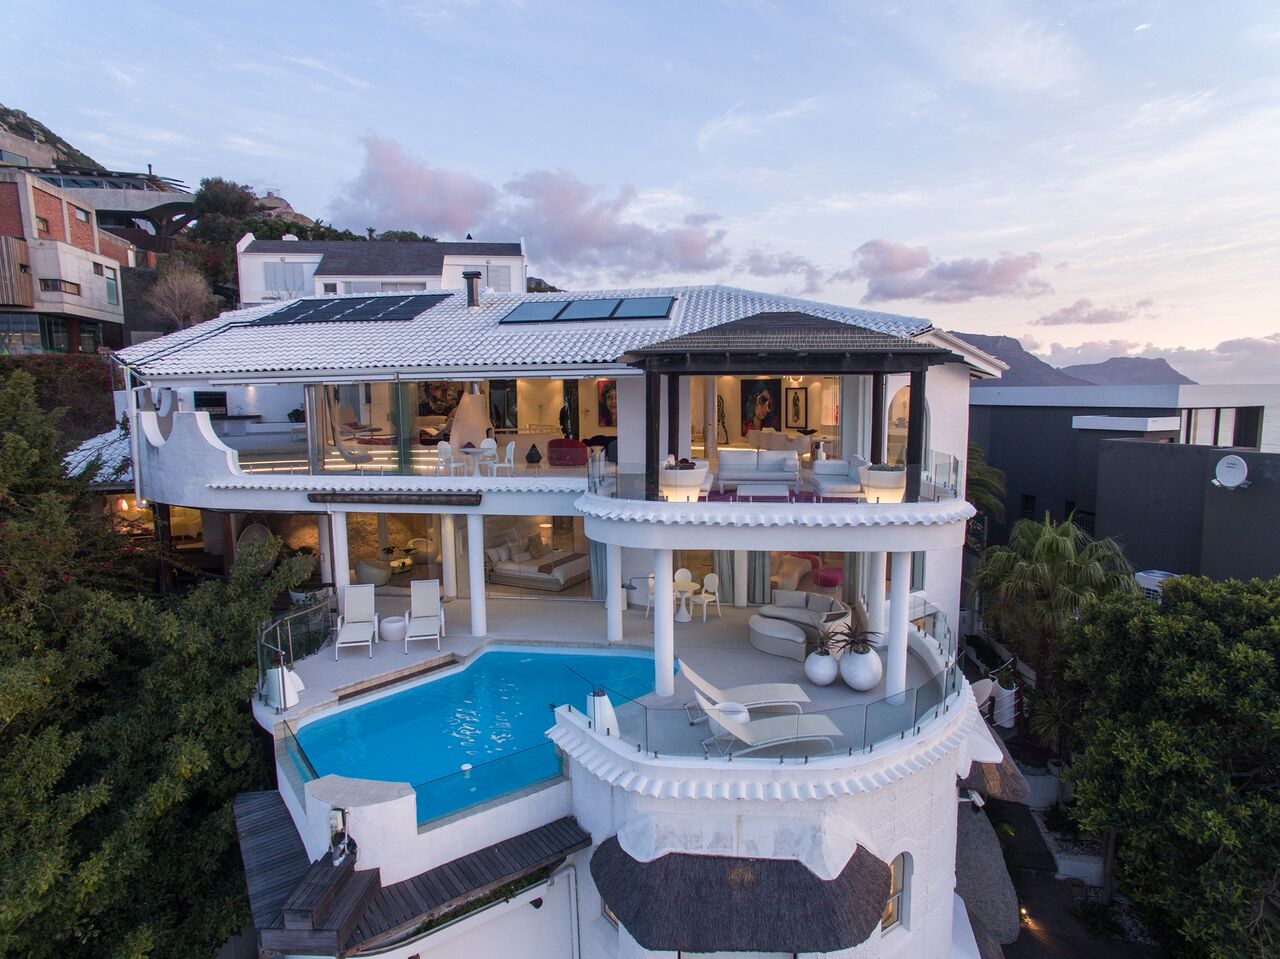 Photo 22 of Eagles Rock Villa accommodation in Bantry Bay, Cape Town with 6 bedrooms and 6 bathrooms